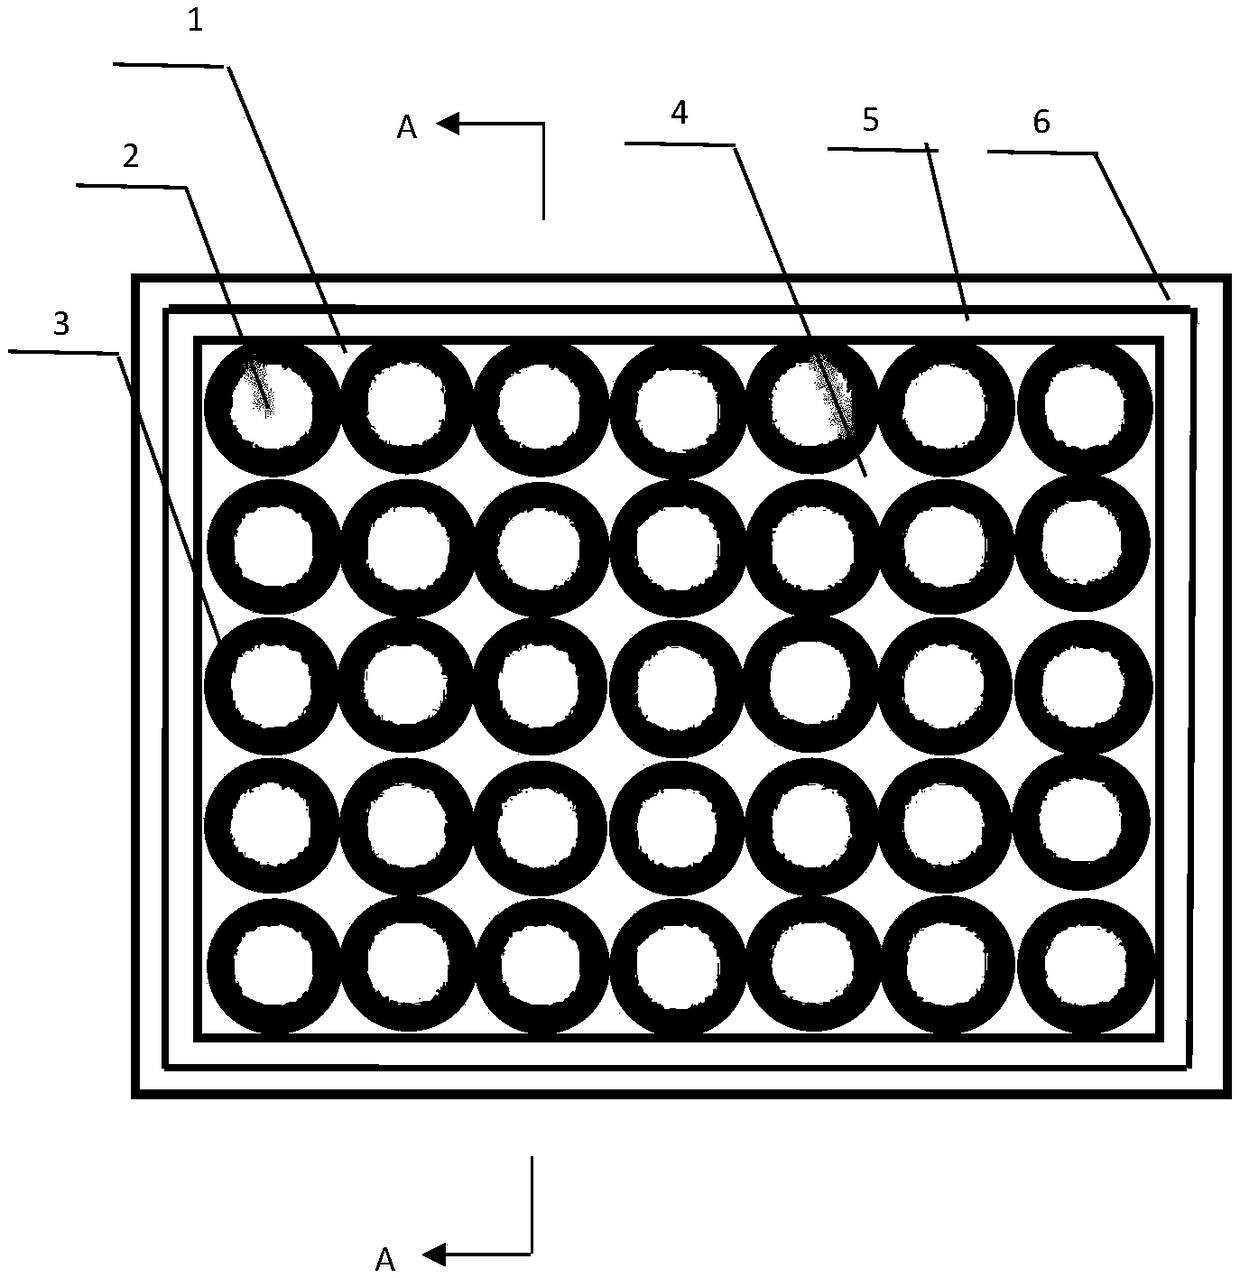 An ordered and densely arranged microcavity structure membrane vacuum glass